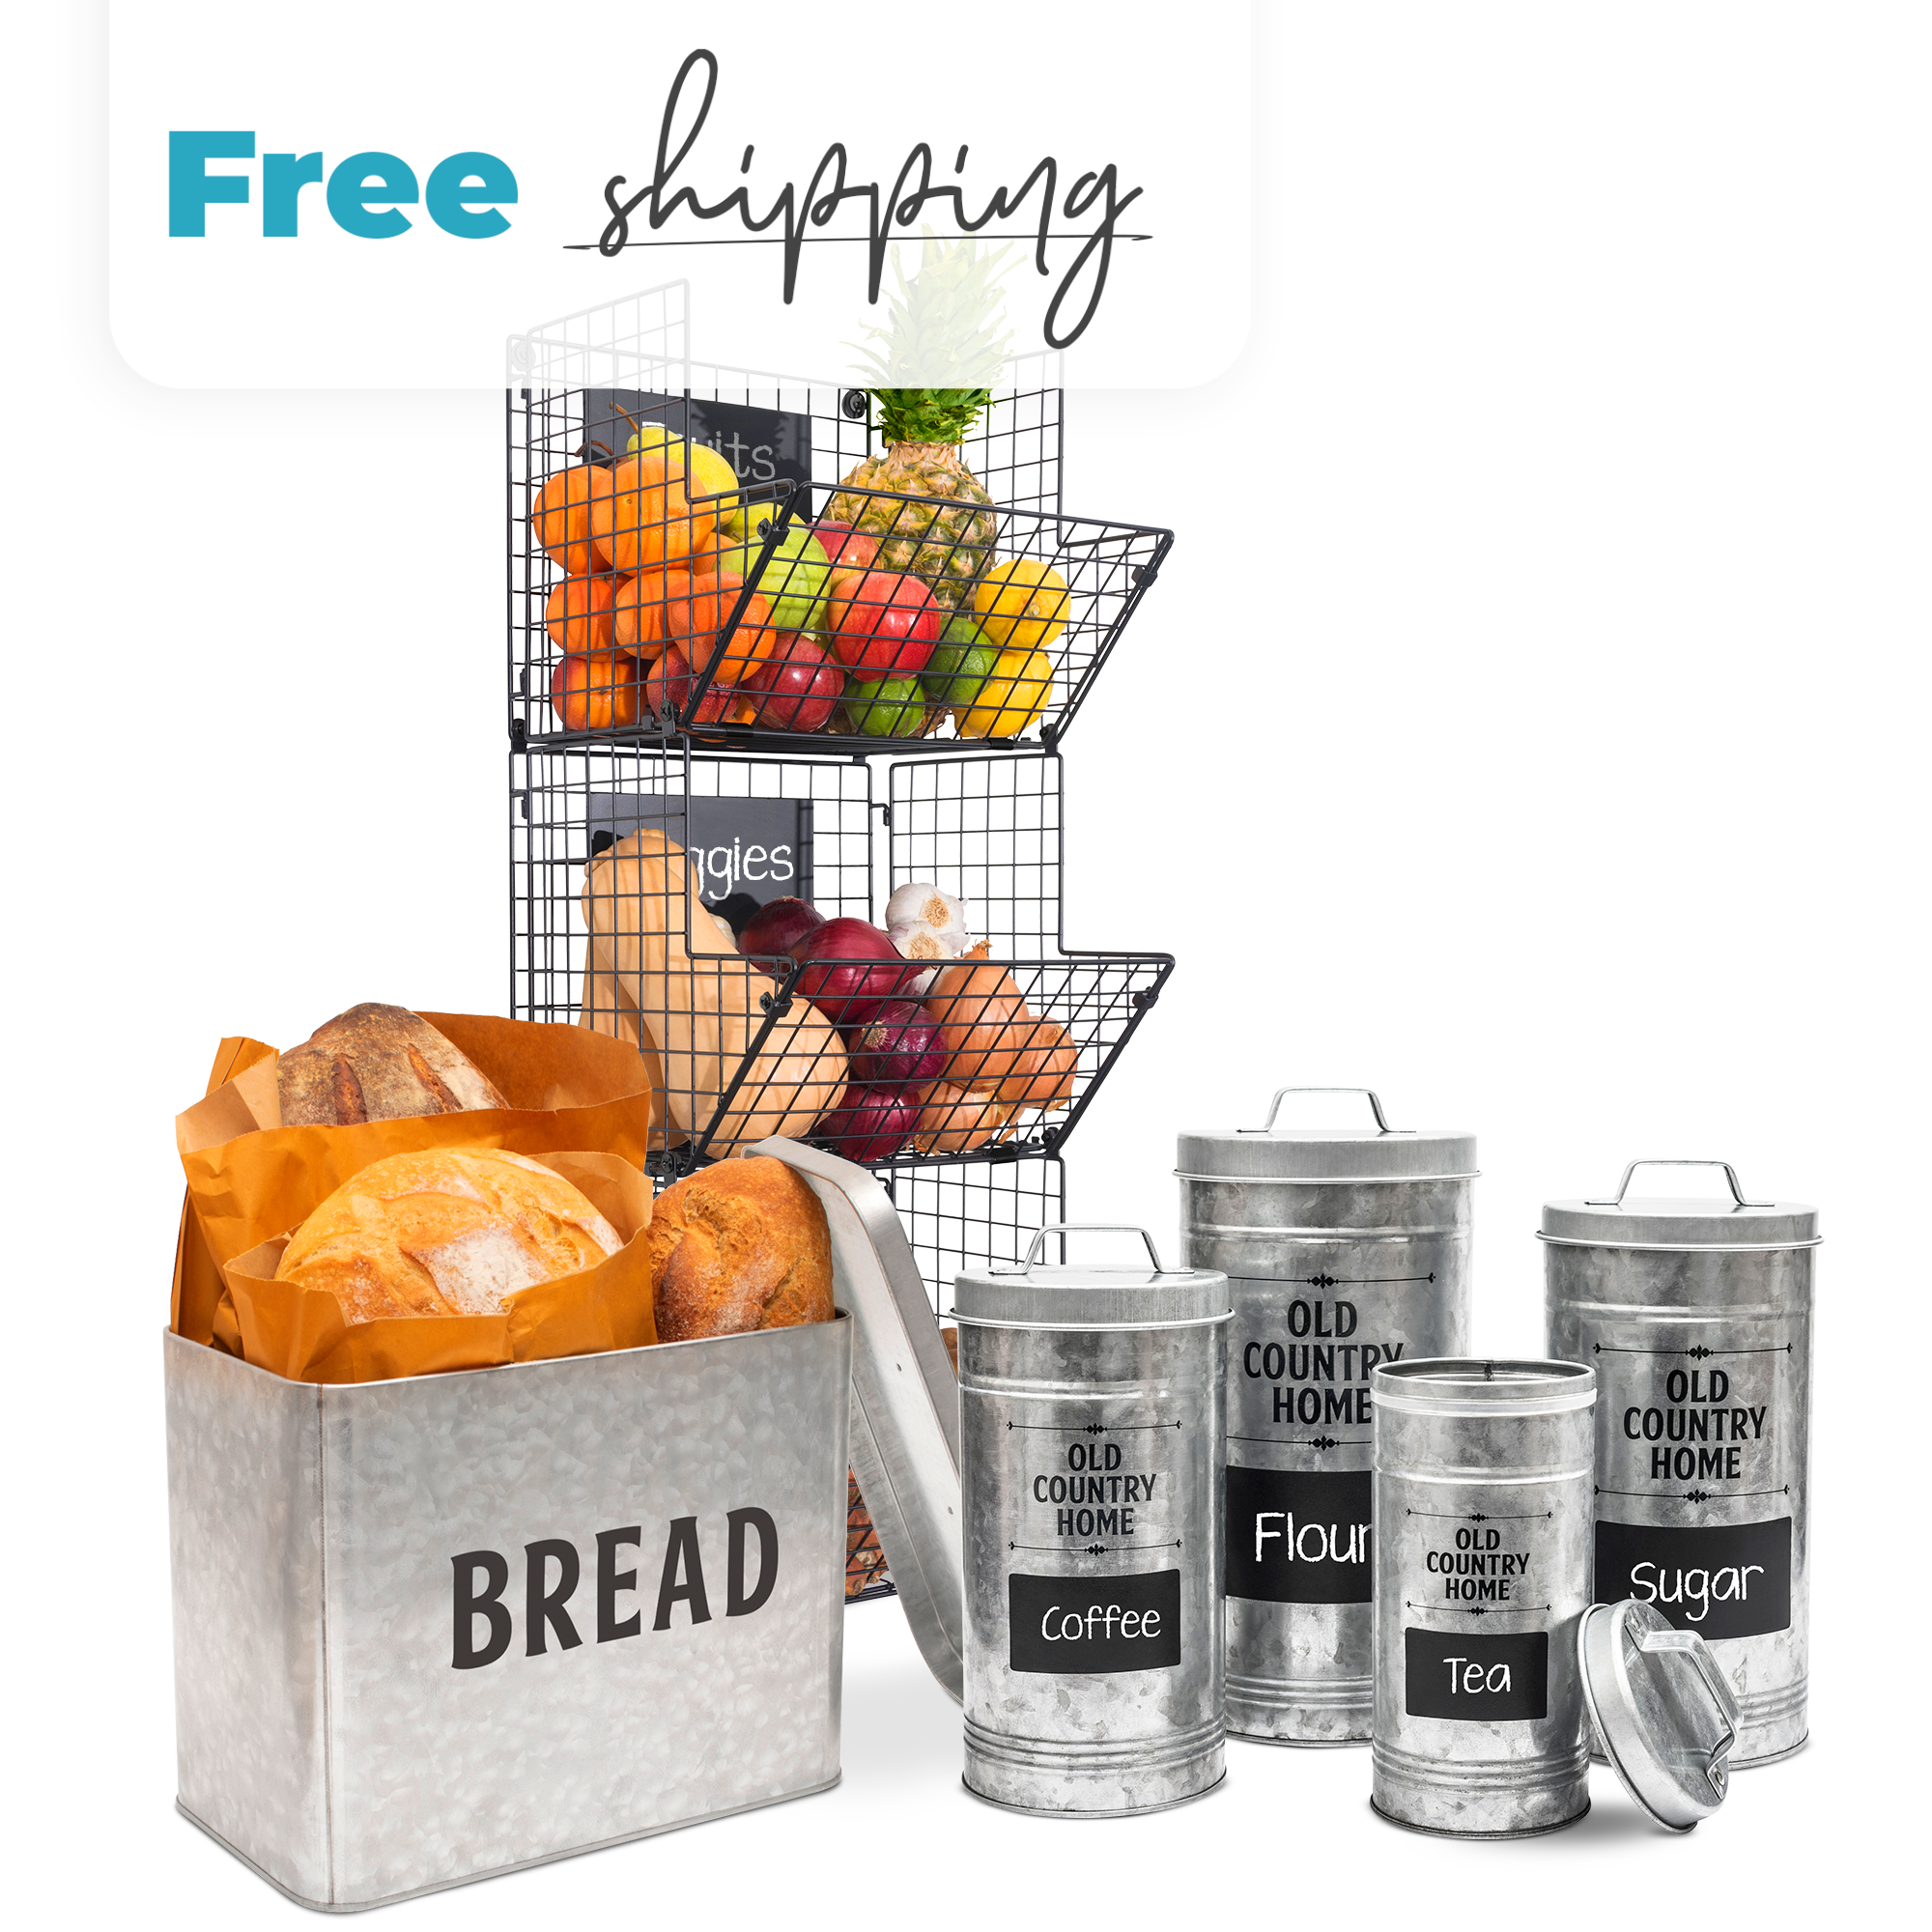 3-Tier Black Metal Wire Wall-Mounted Produce Storage Baskets with Wood –  MyGift